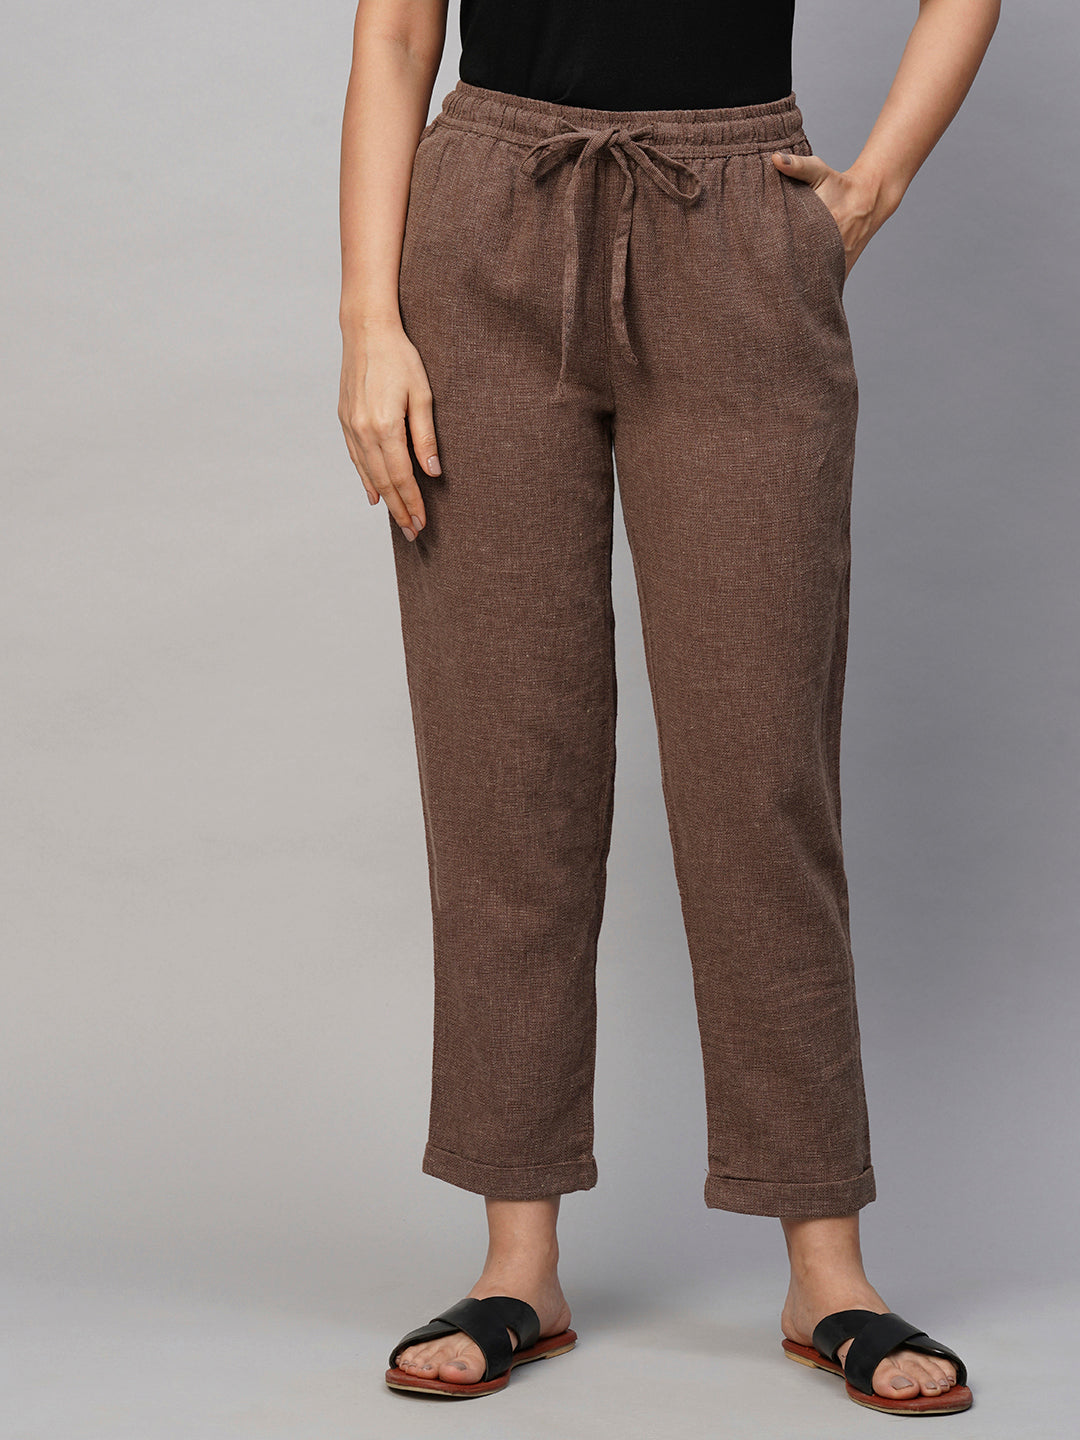 Mid Rise Straight Leg Cotton Cargo Pant in Green  Glassons